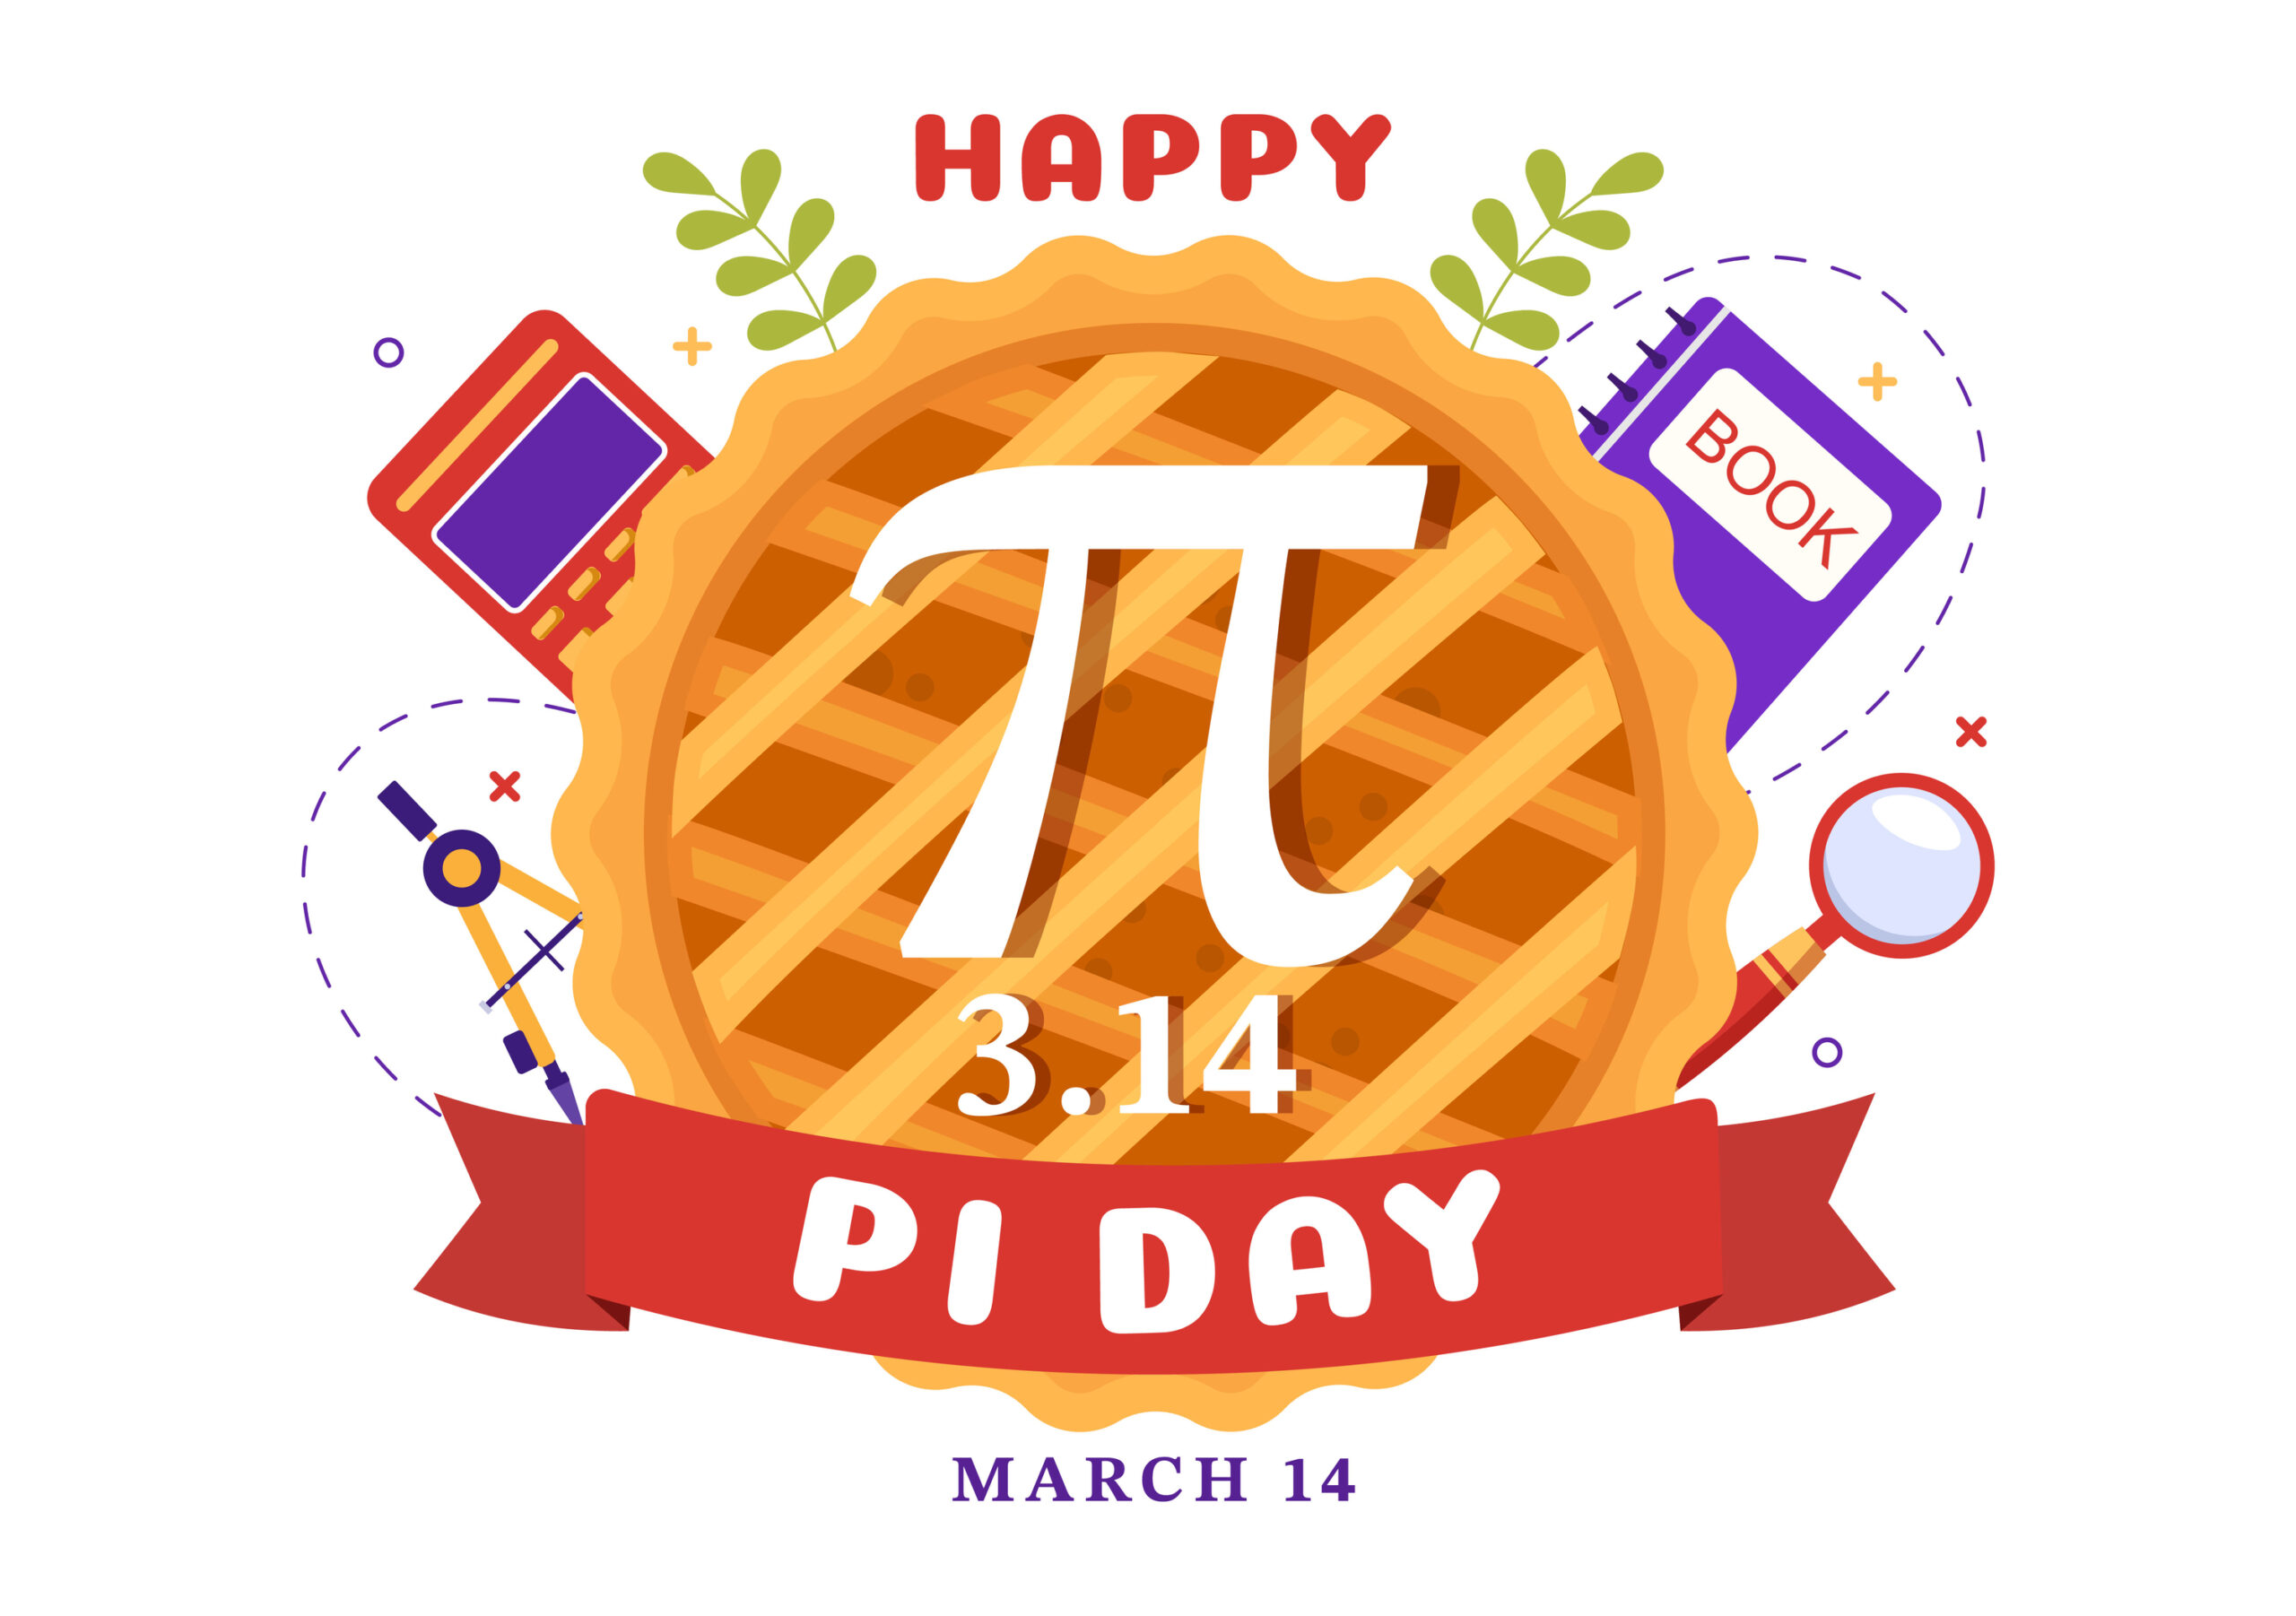 It's Time to CelebratePi Day is March 14th!